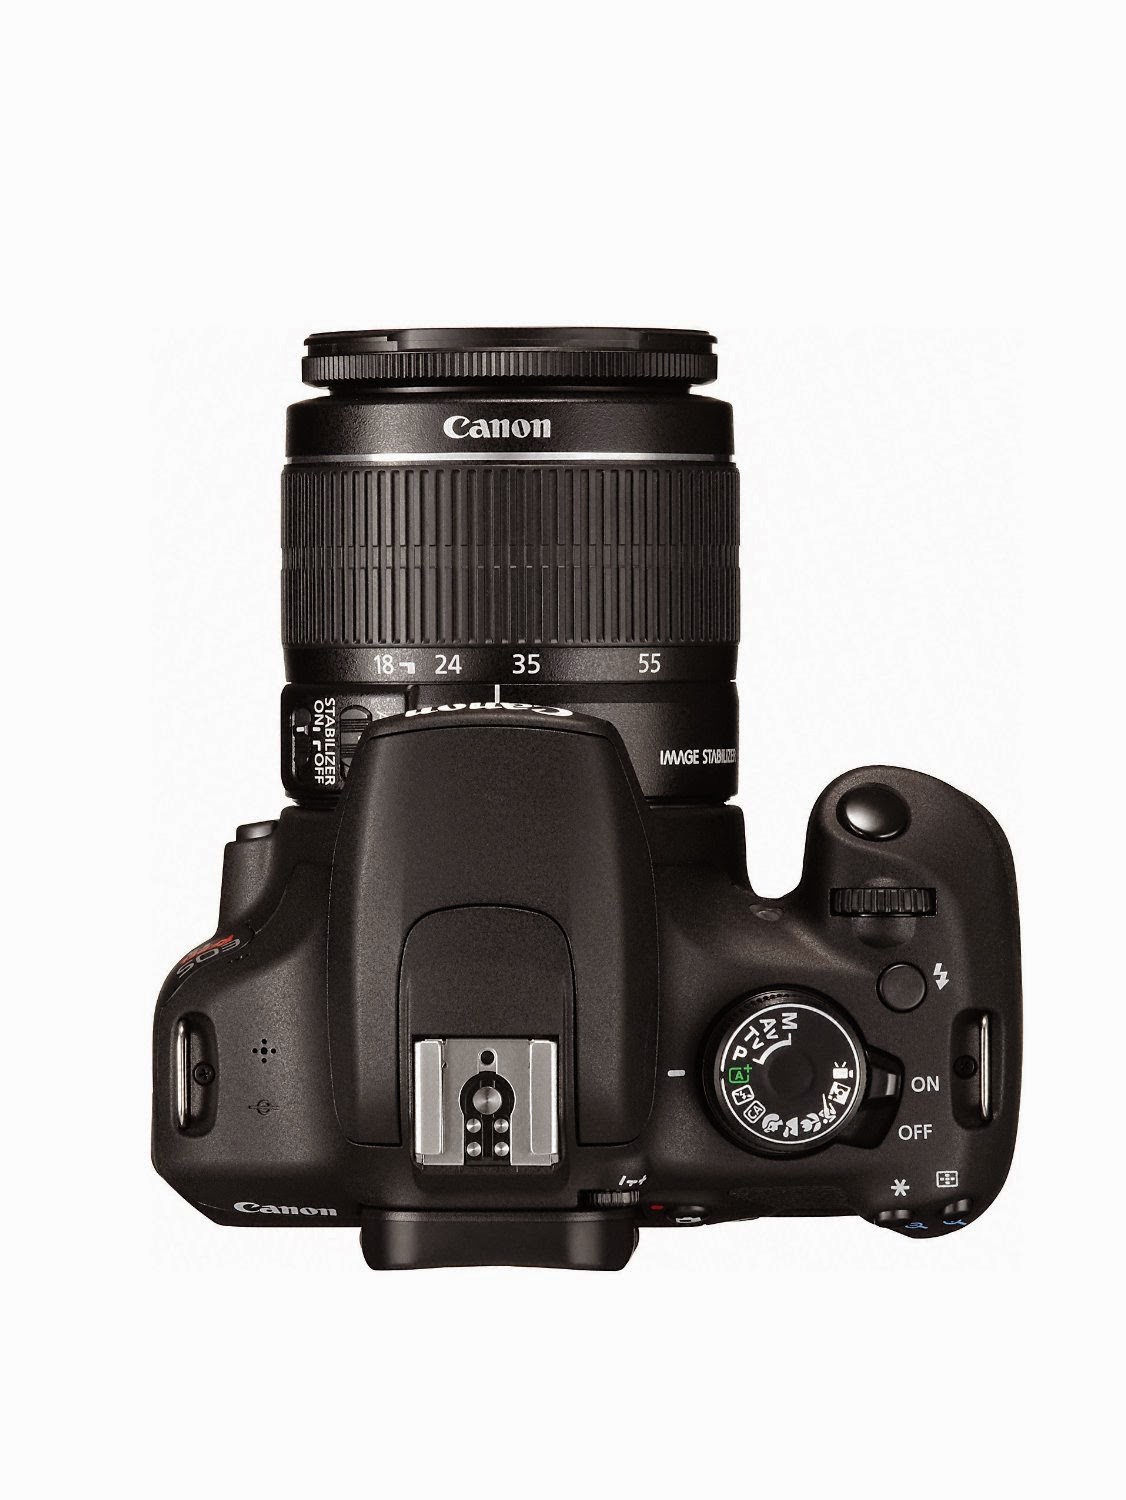 Canon EOS Rebel T5 DSLR, top view, picture, image, review features & specifications